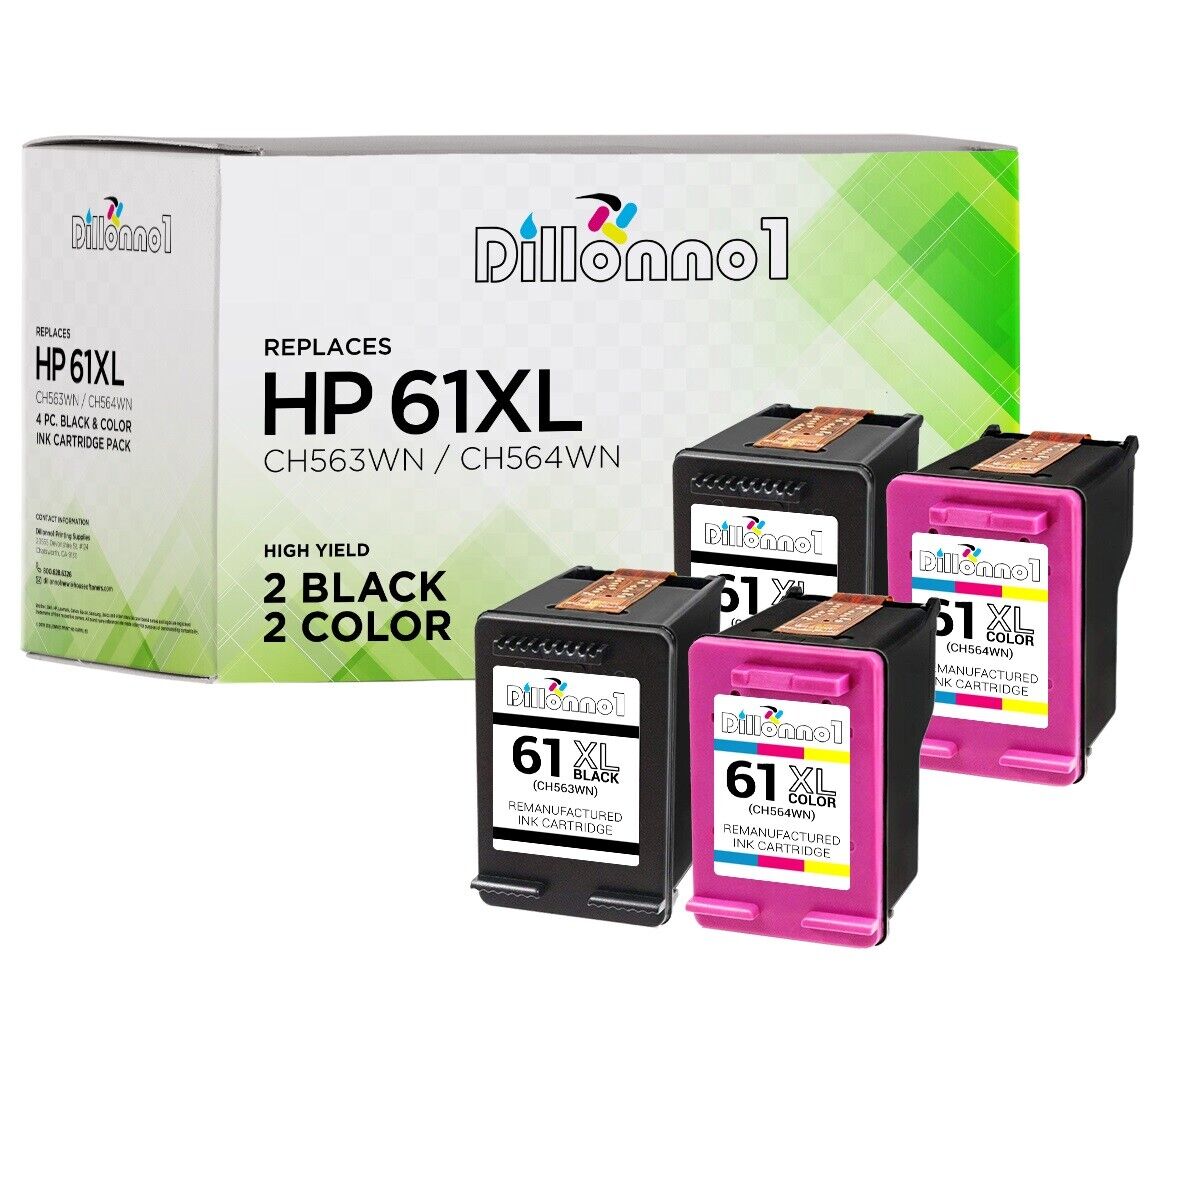 4PK Replacement for HP61XL 2-Black & 2-Color Ink Cartridges 1512 2050 2510 2540 